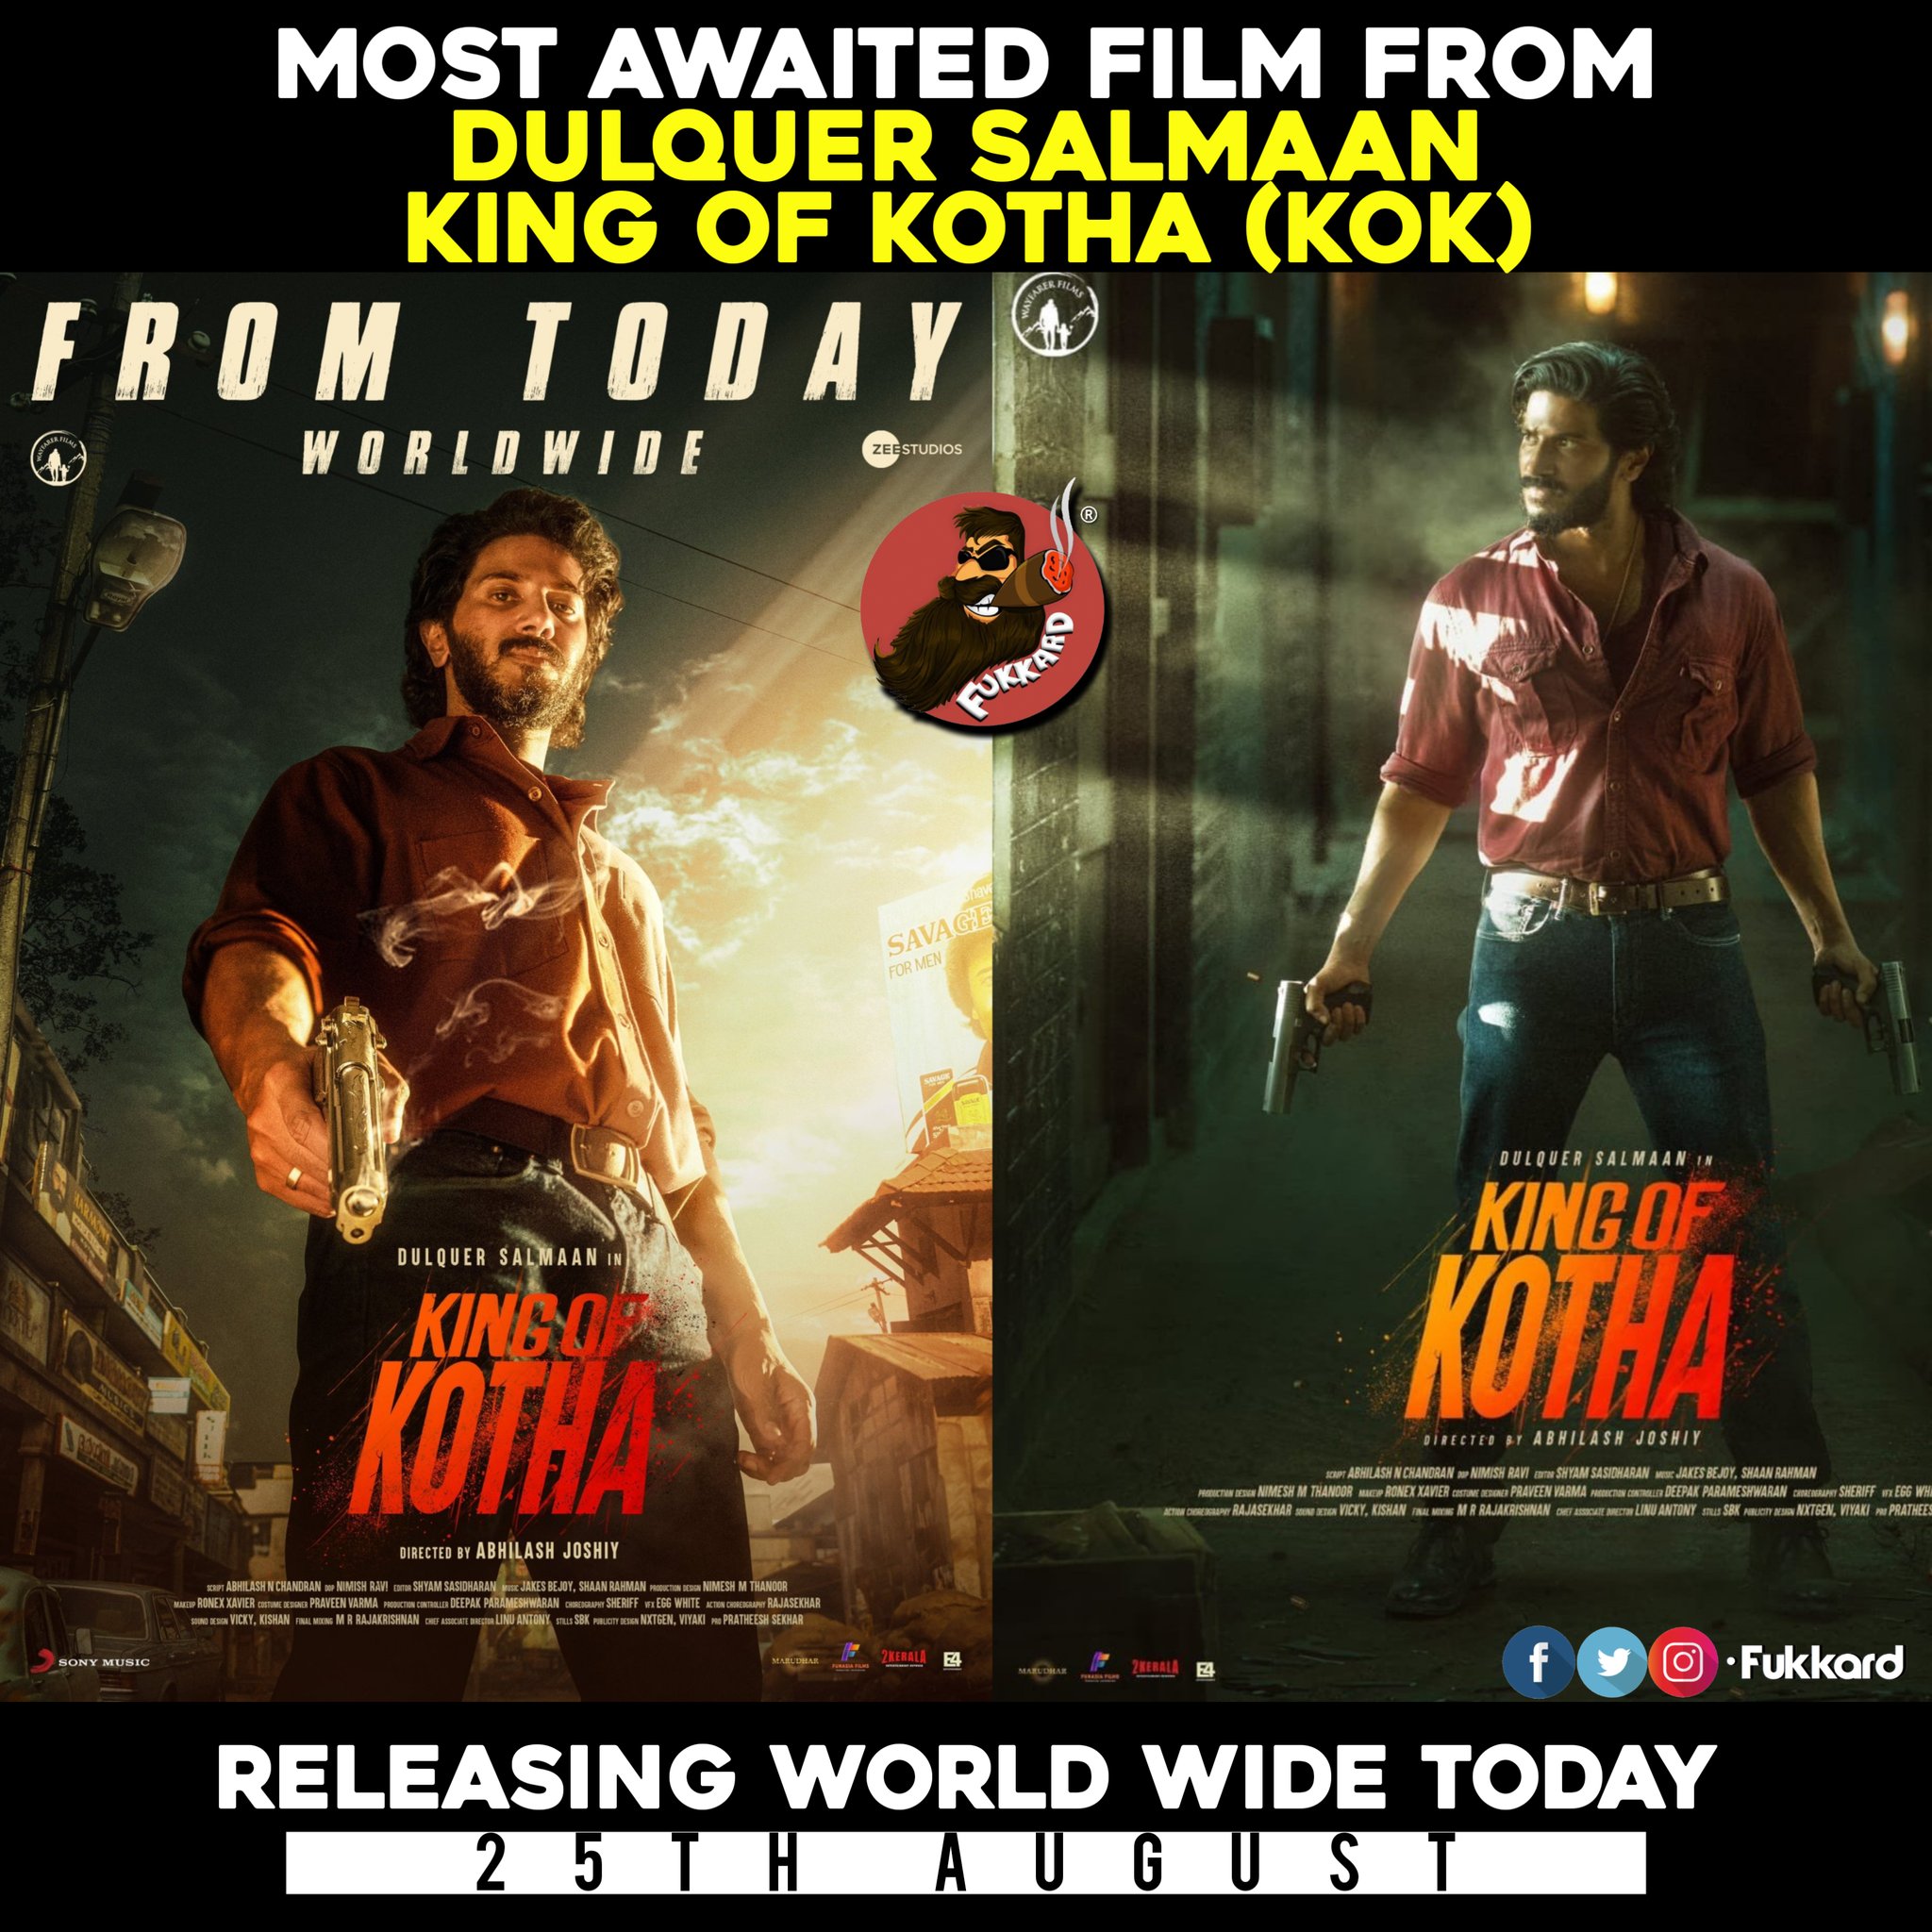 King of kotha release today